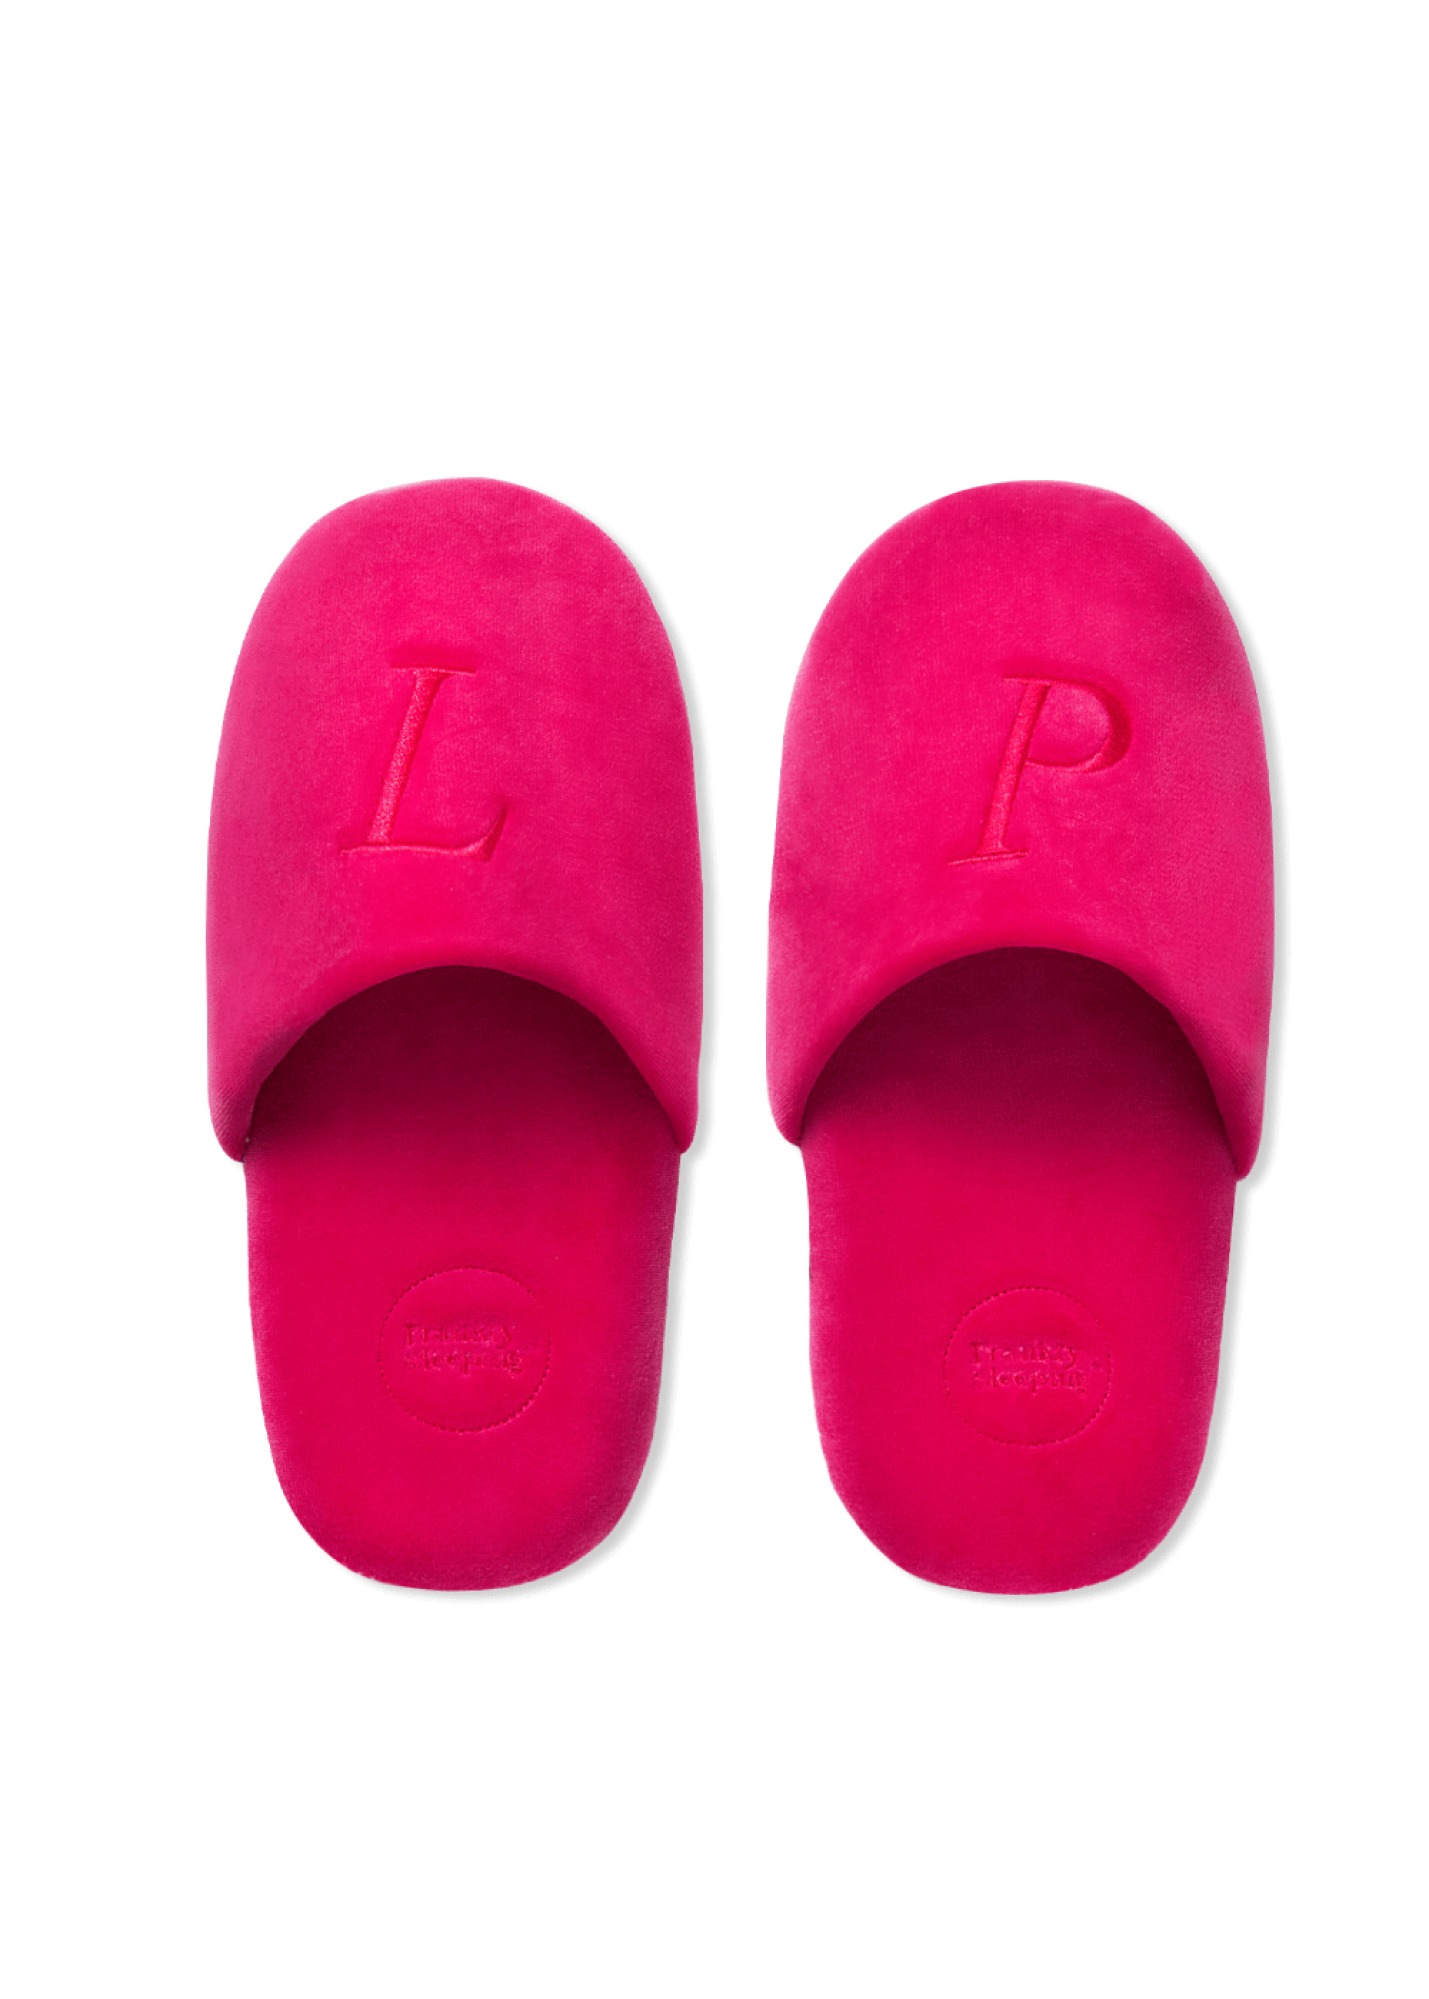 Washable Home Office Shoes, Fuchsia Pink,FRANKLY